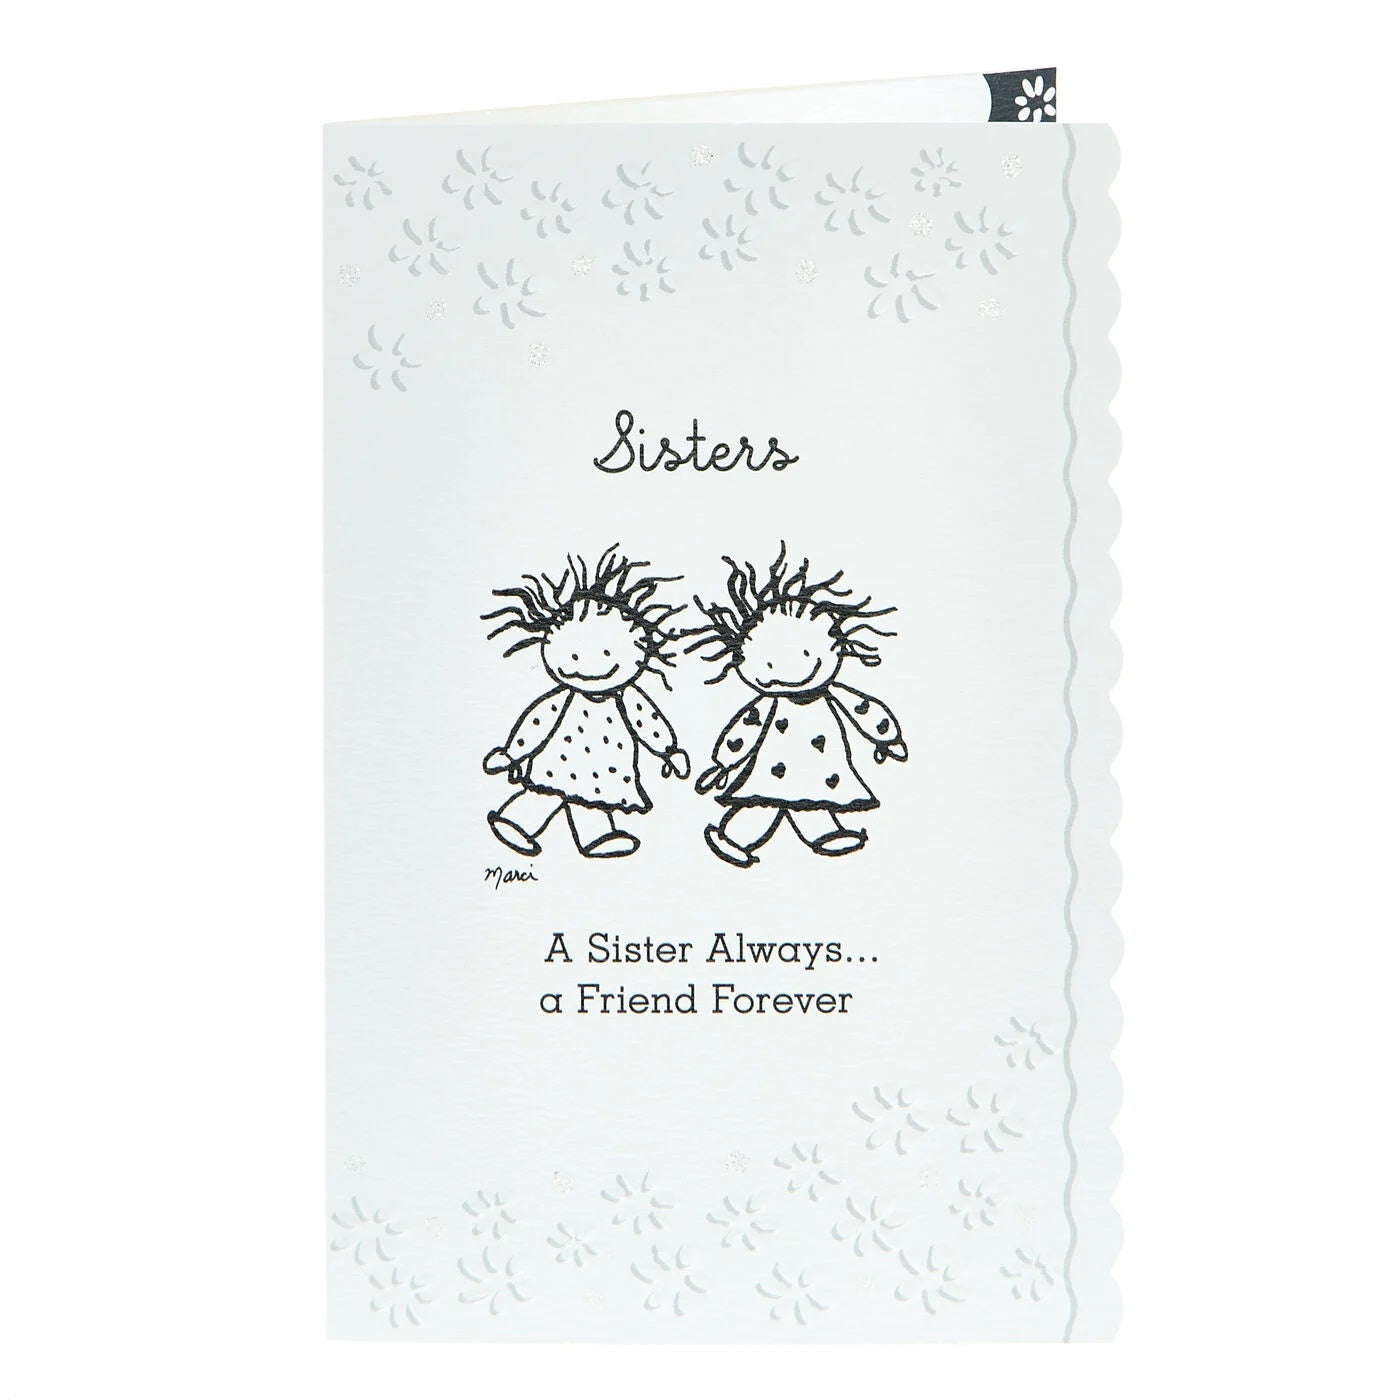 A Sister Always a Friend Forever Card - Blue Mountain Arts